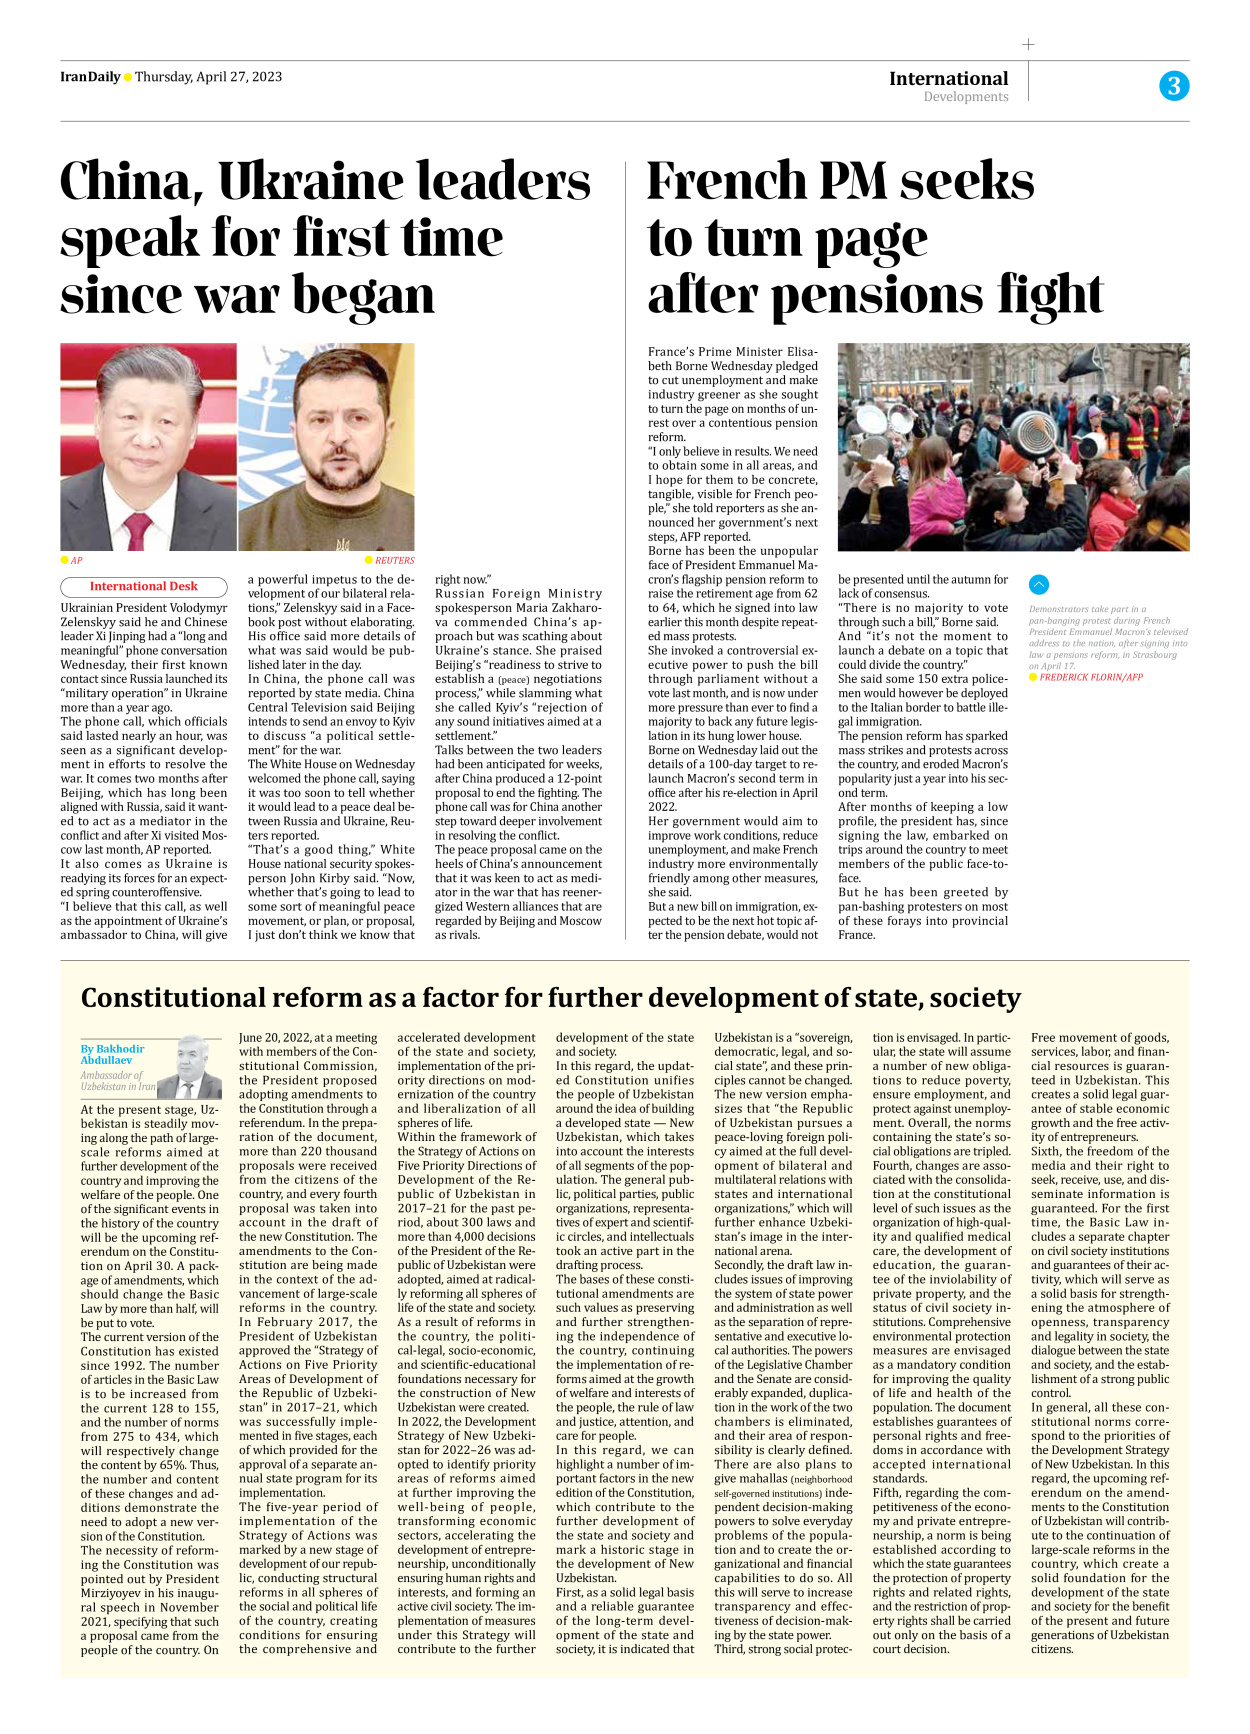 Iran Daily - Number Seven Thousand Two Hundred and Seventy Seven - 27 April 2023 - Page 3